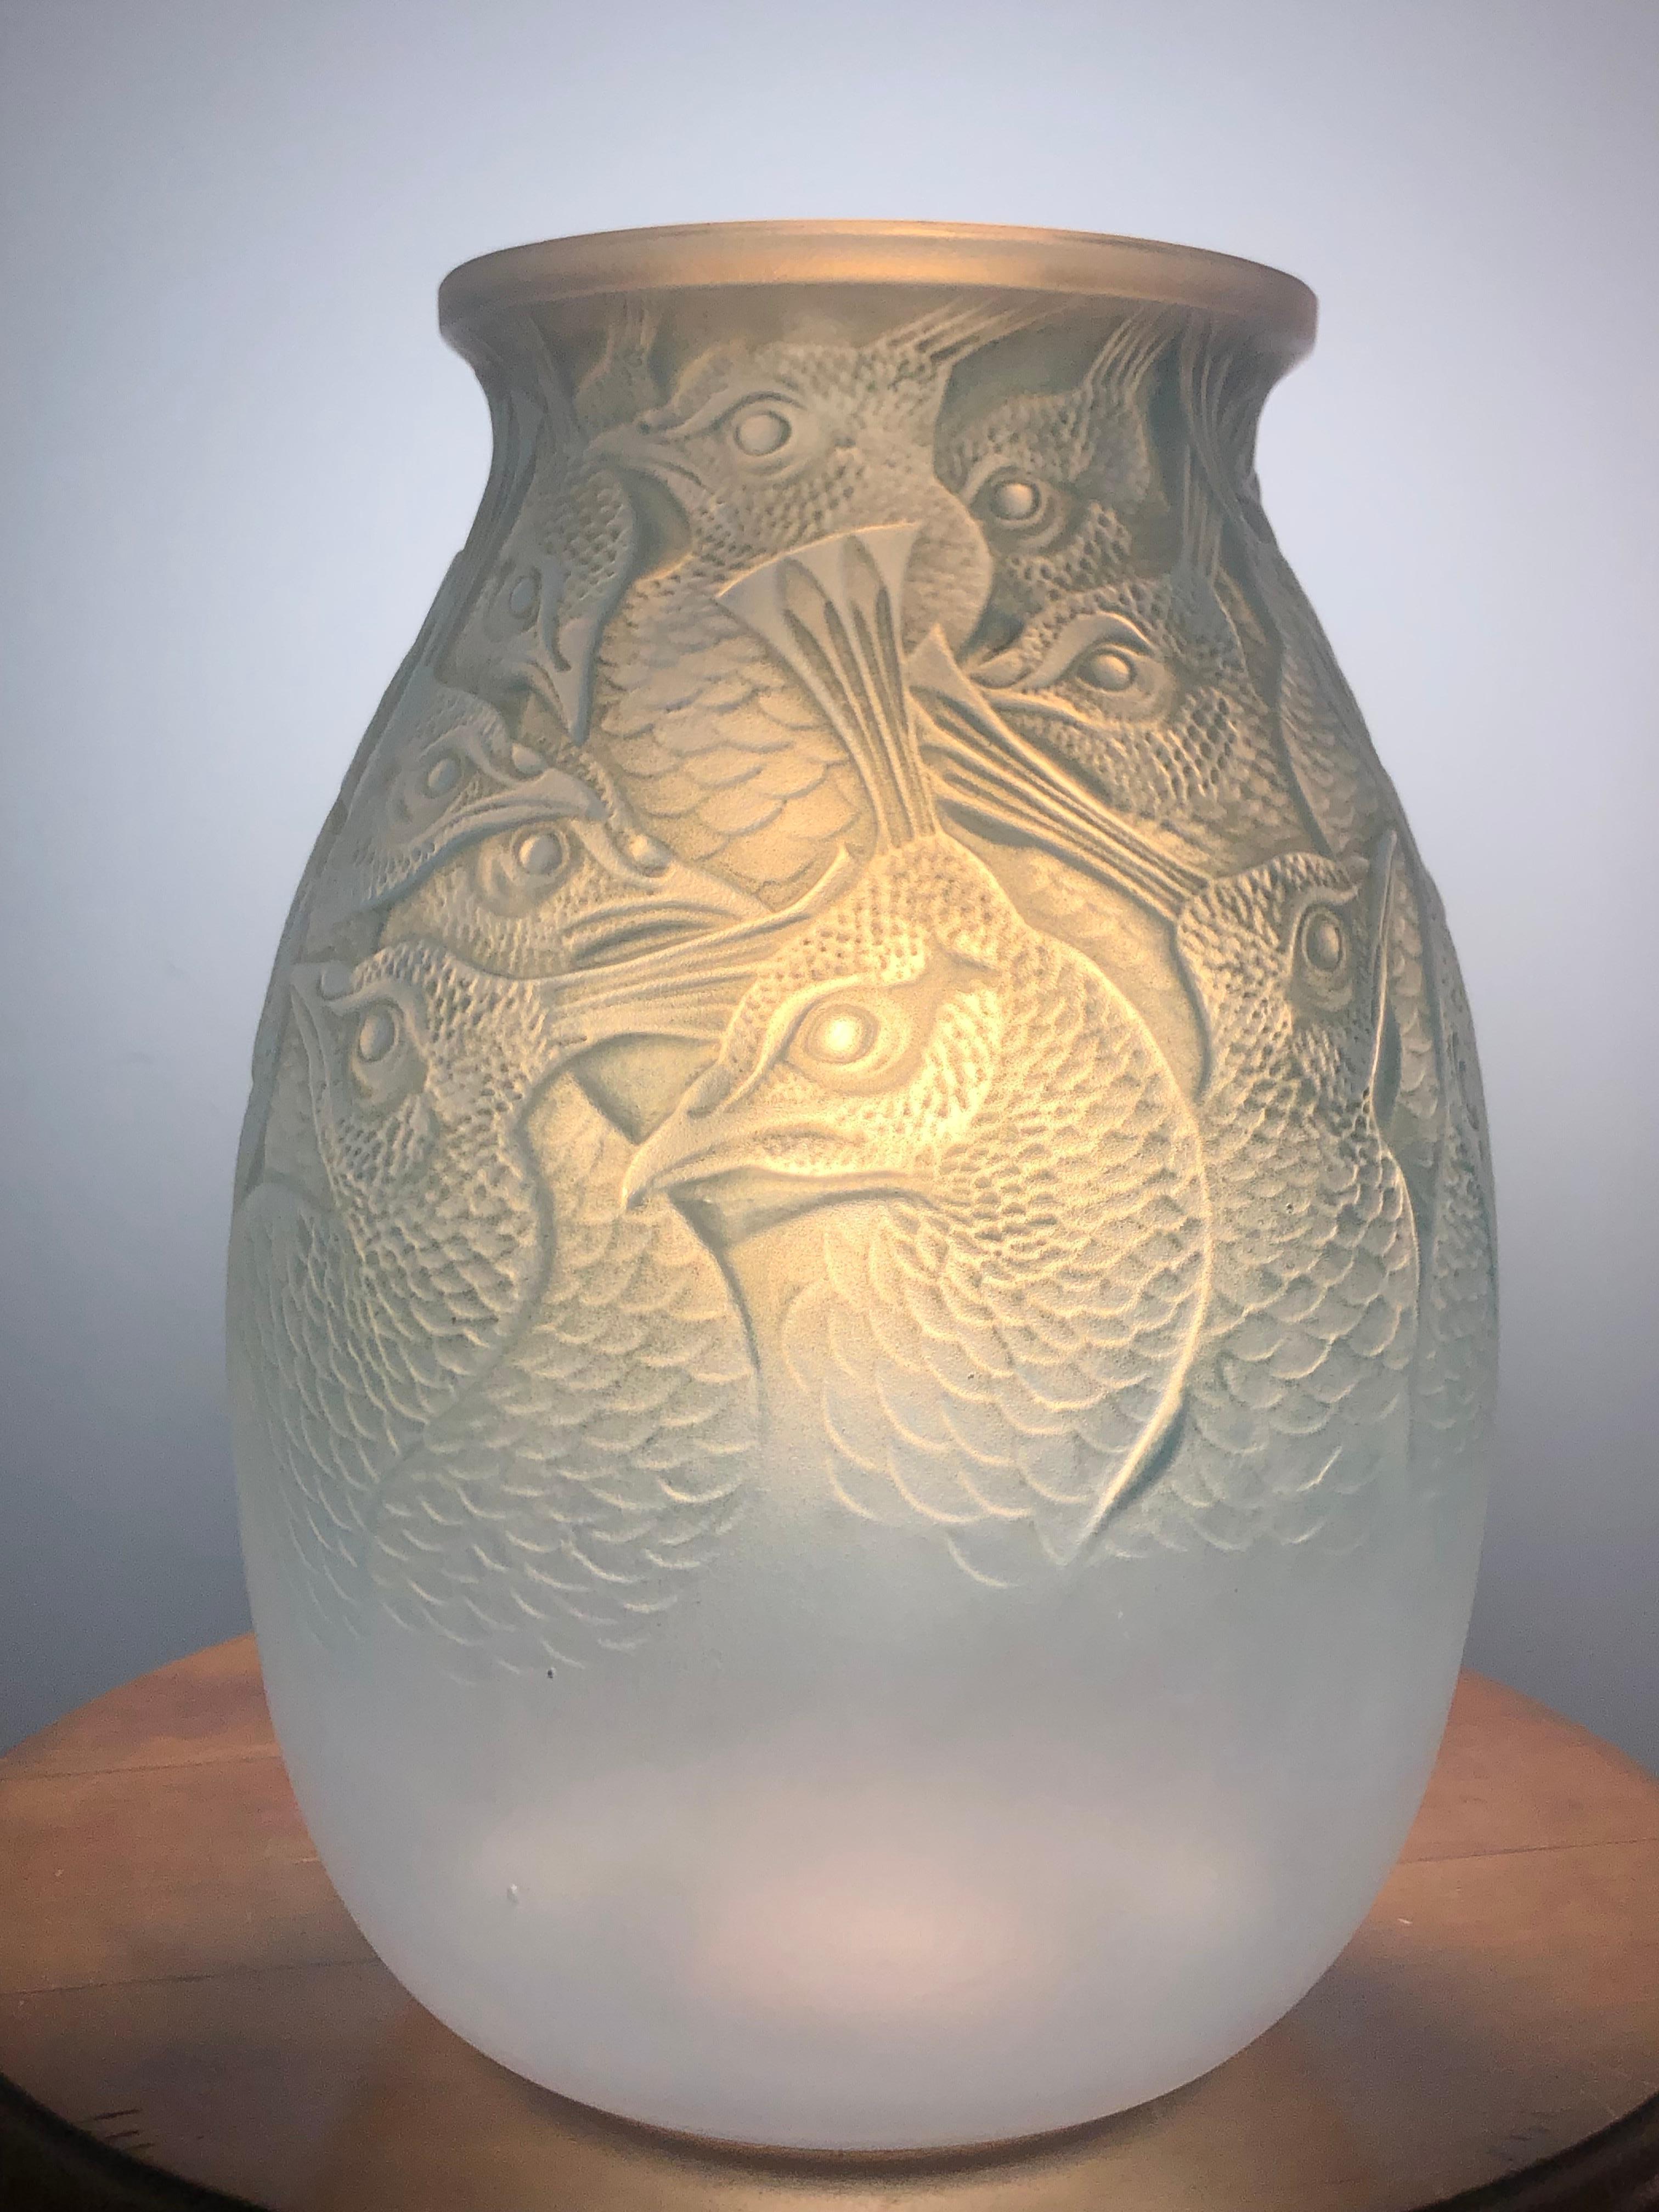 Molded 1928 Rene Lalique Borromee Vase in Double Cased Opalescent Glass Stain Peacocks